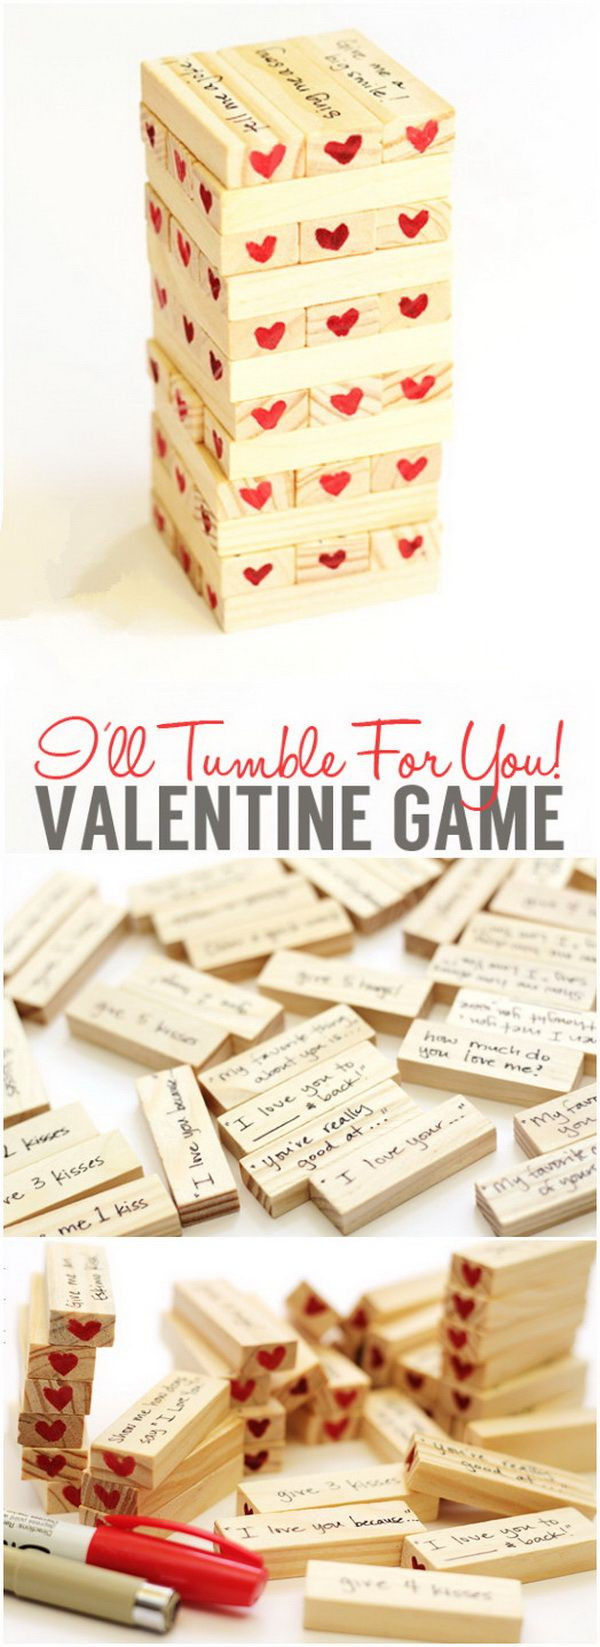 Valentine Gift Ideas For Boyfriend Diy
 Valentine’s Day Hearty Tumble Game Another fun t idea